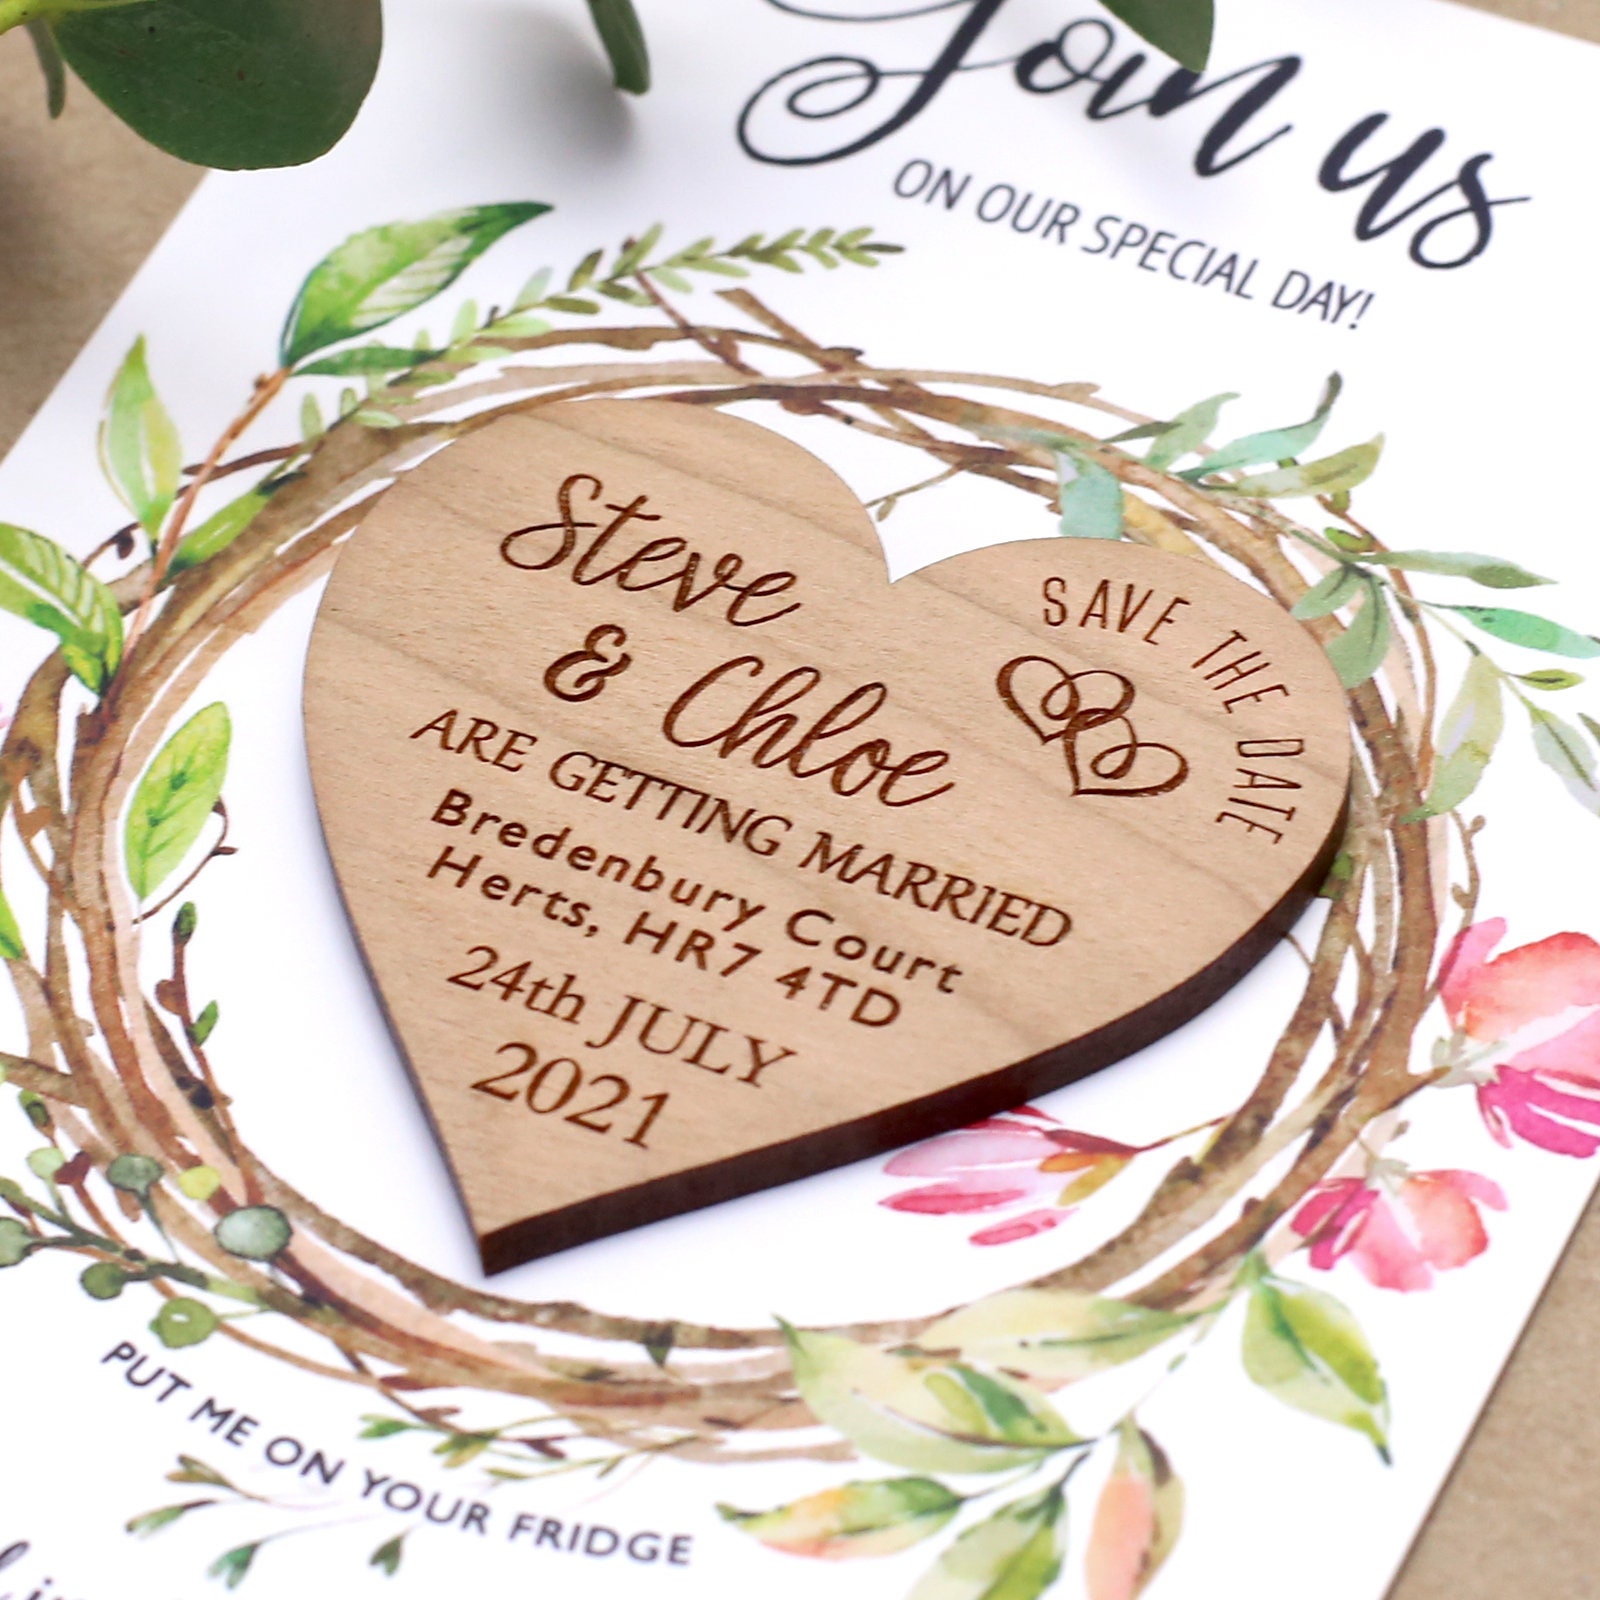 Personalised Rustic Wooden Heart Save The Date Fridge Magnet Wedding Invites 